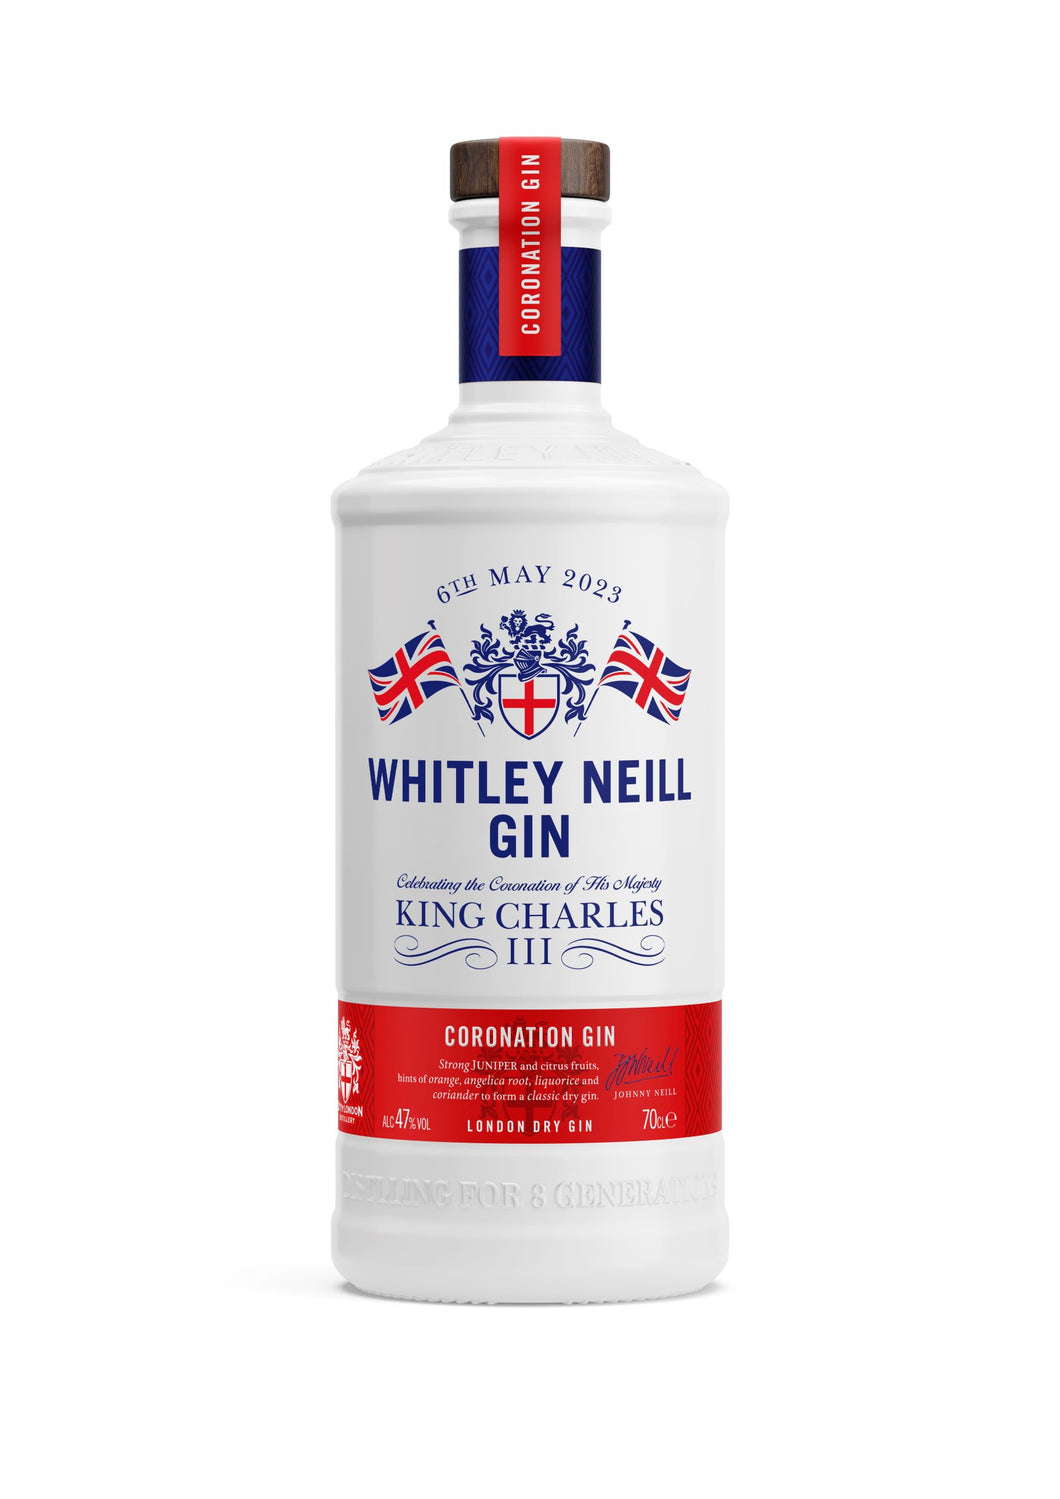 New Limited Edition Whitley Neill Coronation Gin